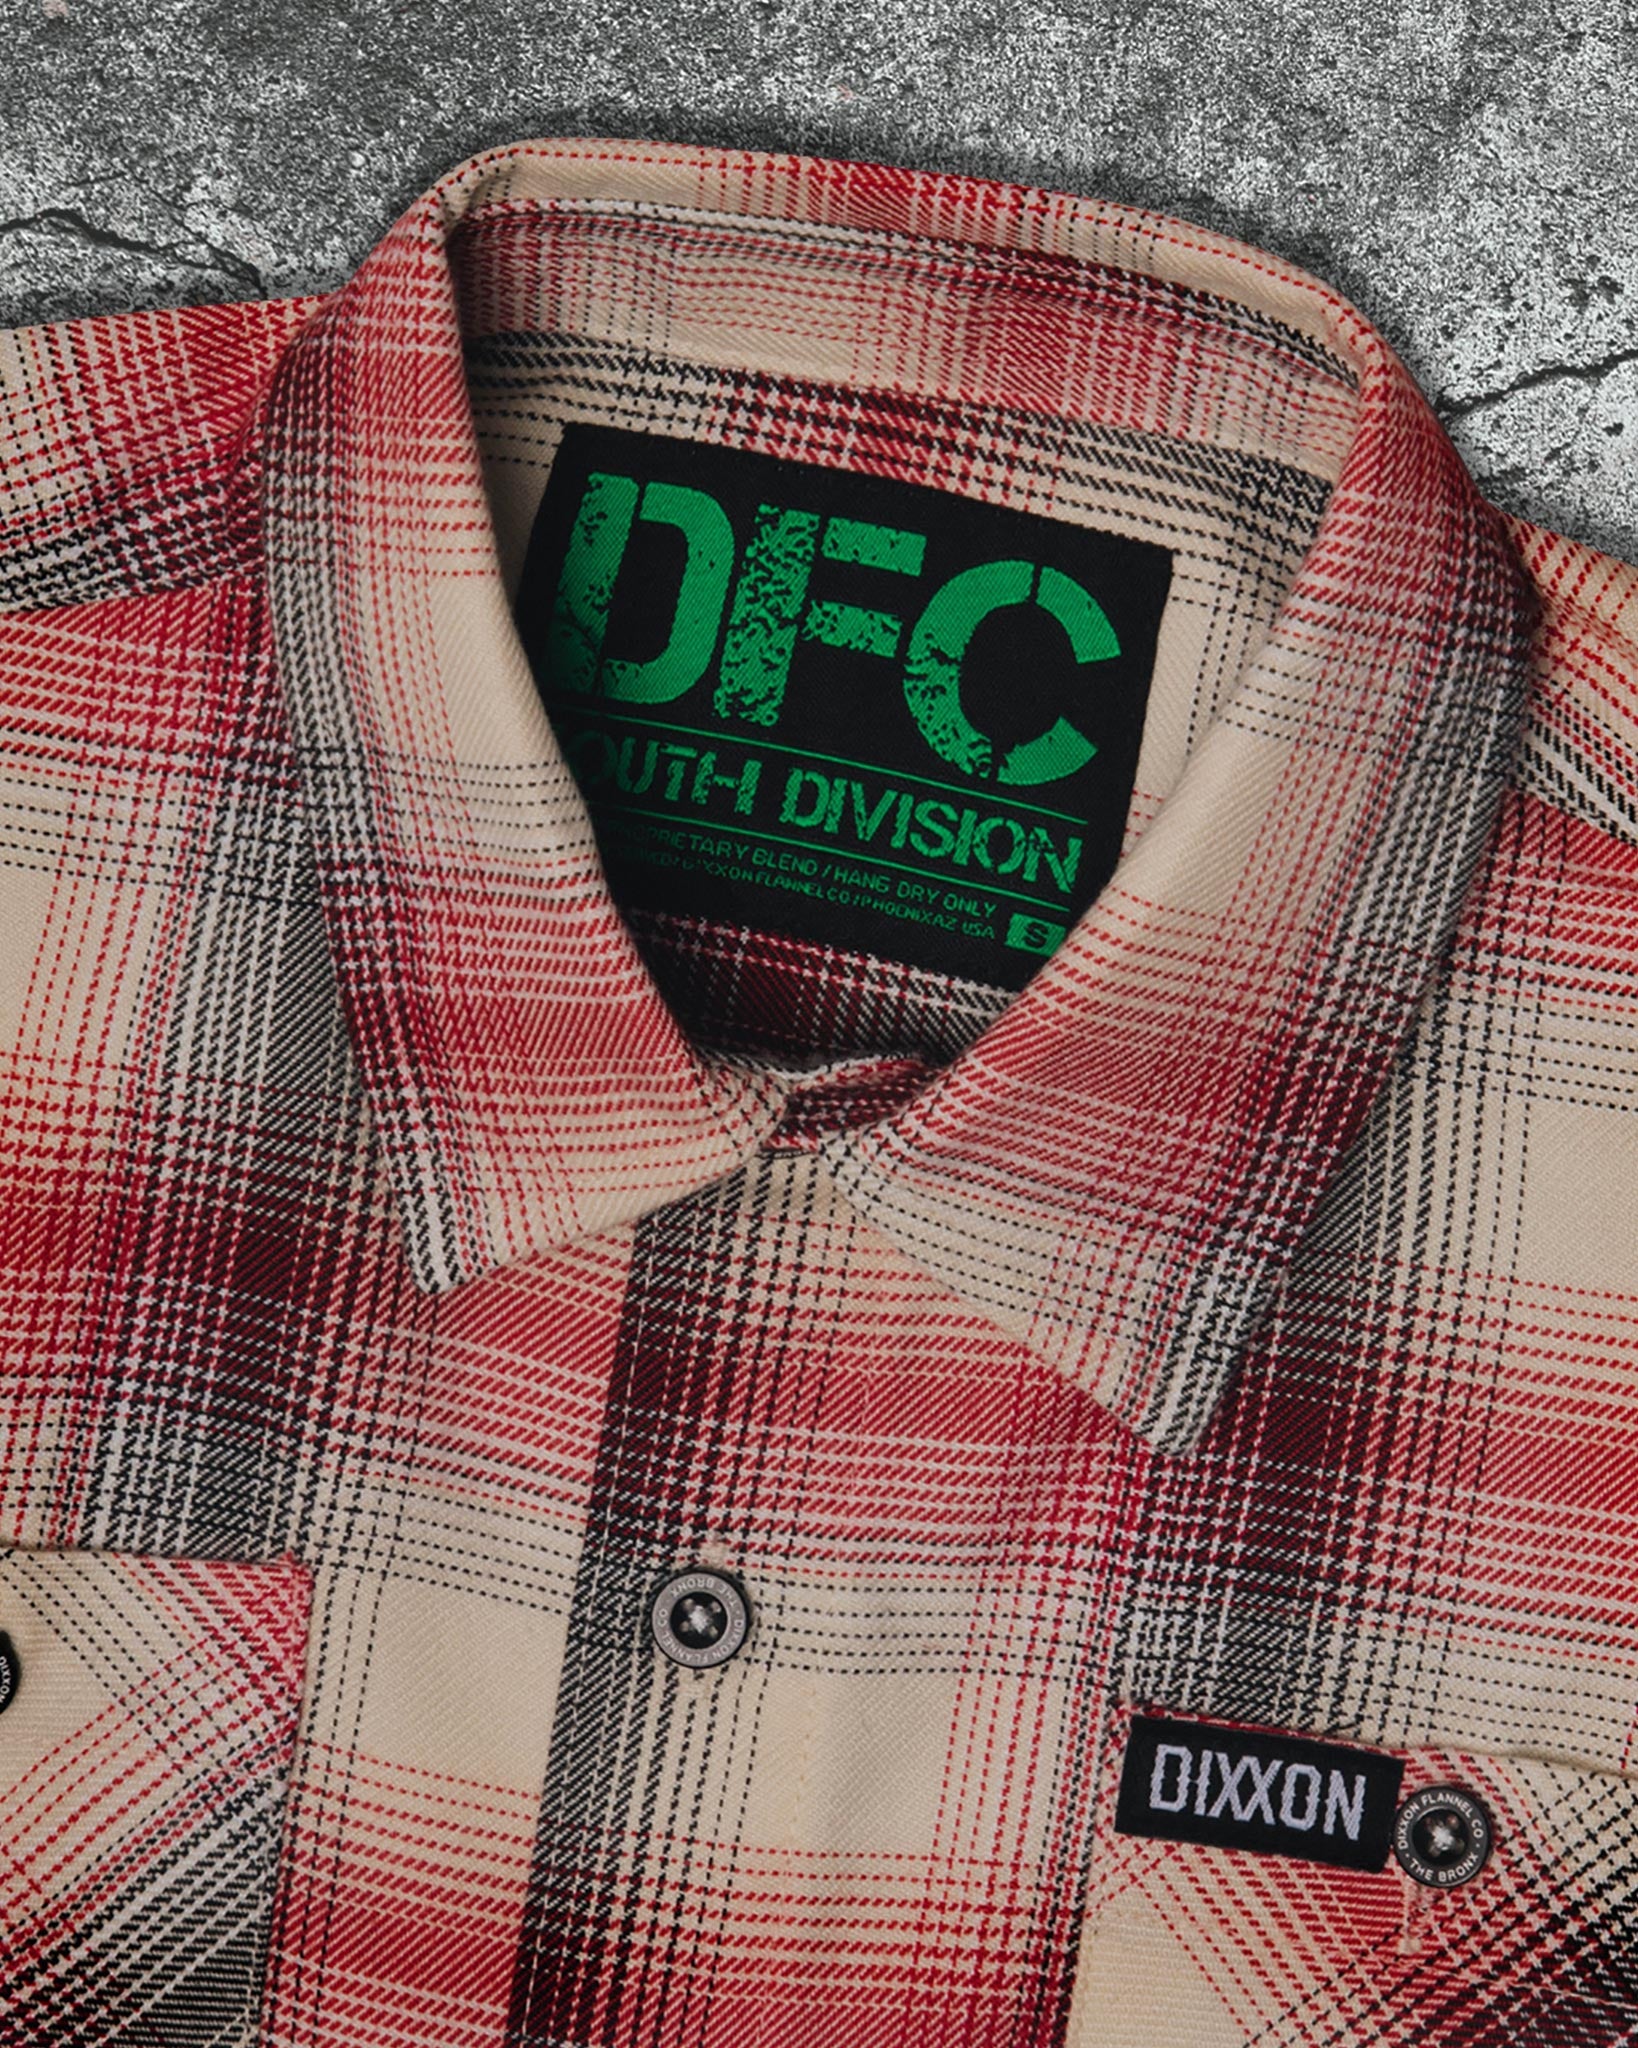 Dixxon Youth The Bronx Flannel